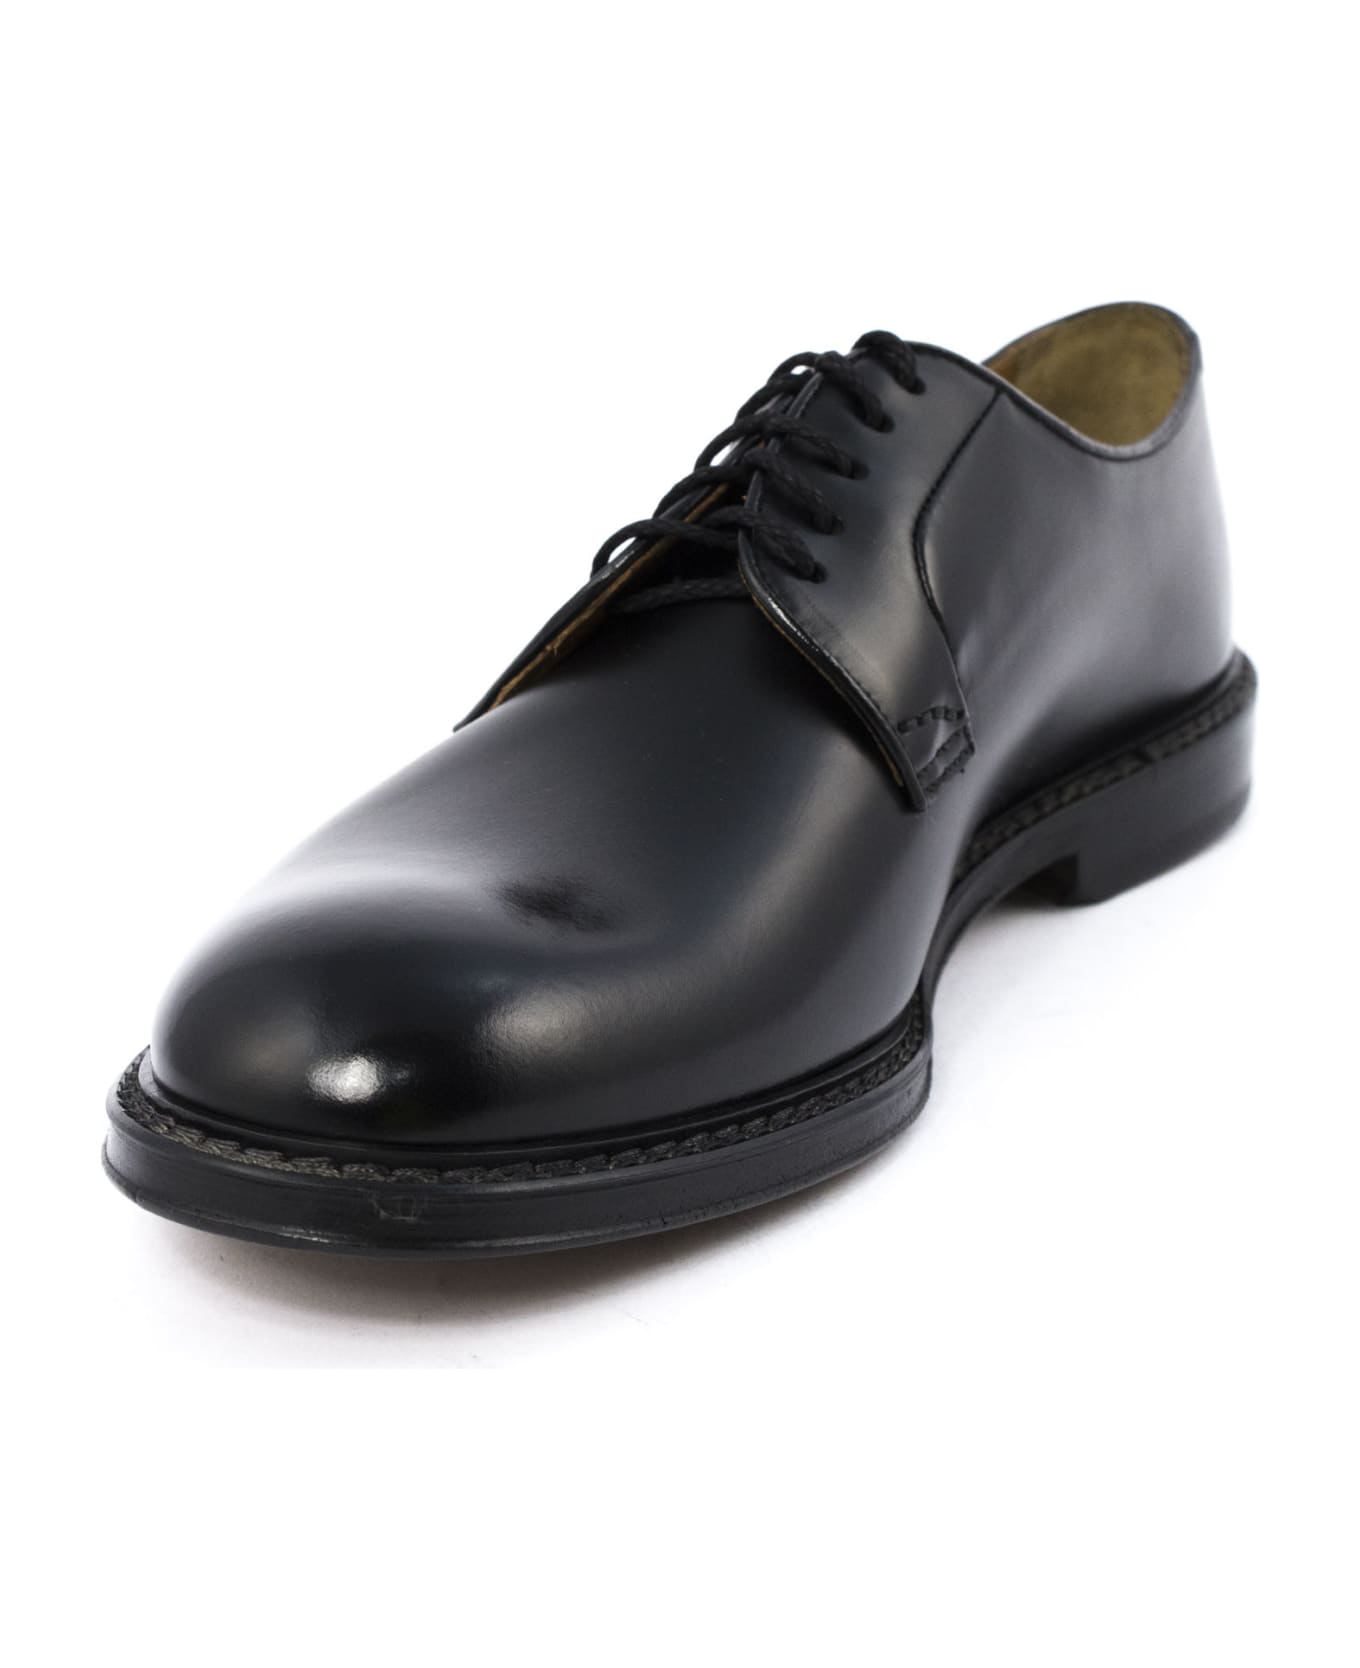 Doucal's Black Semi-glossy Leather Derby Shoes - Black